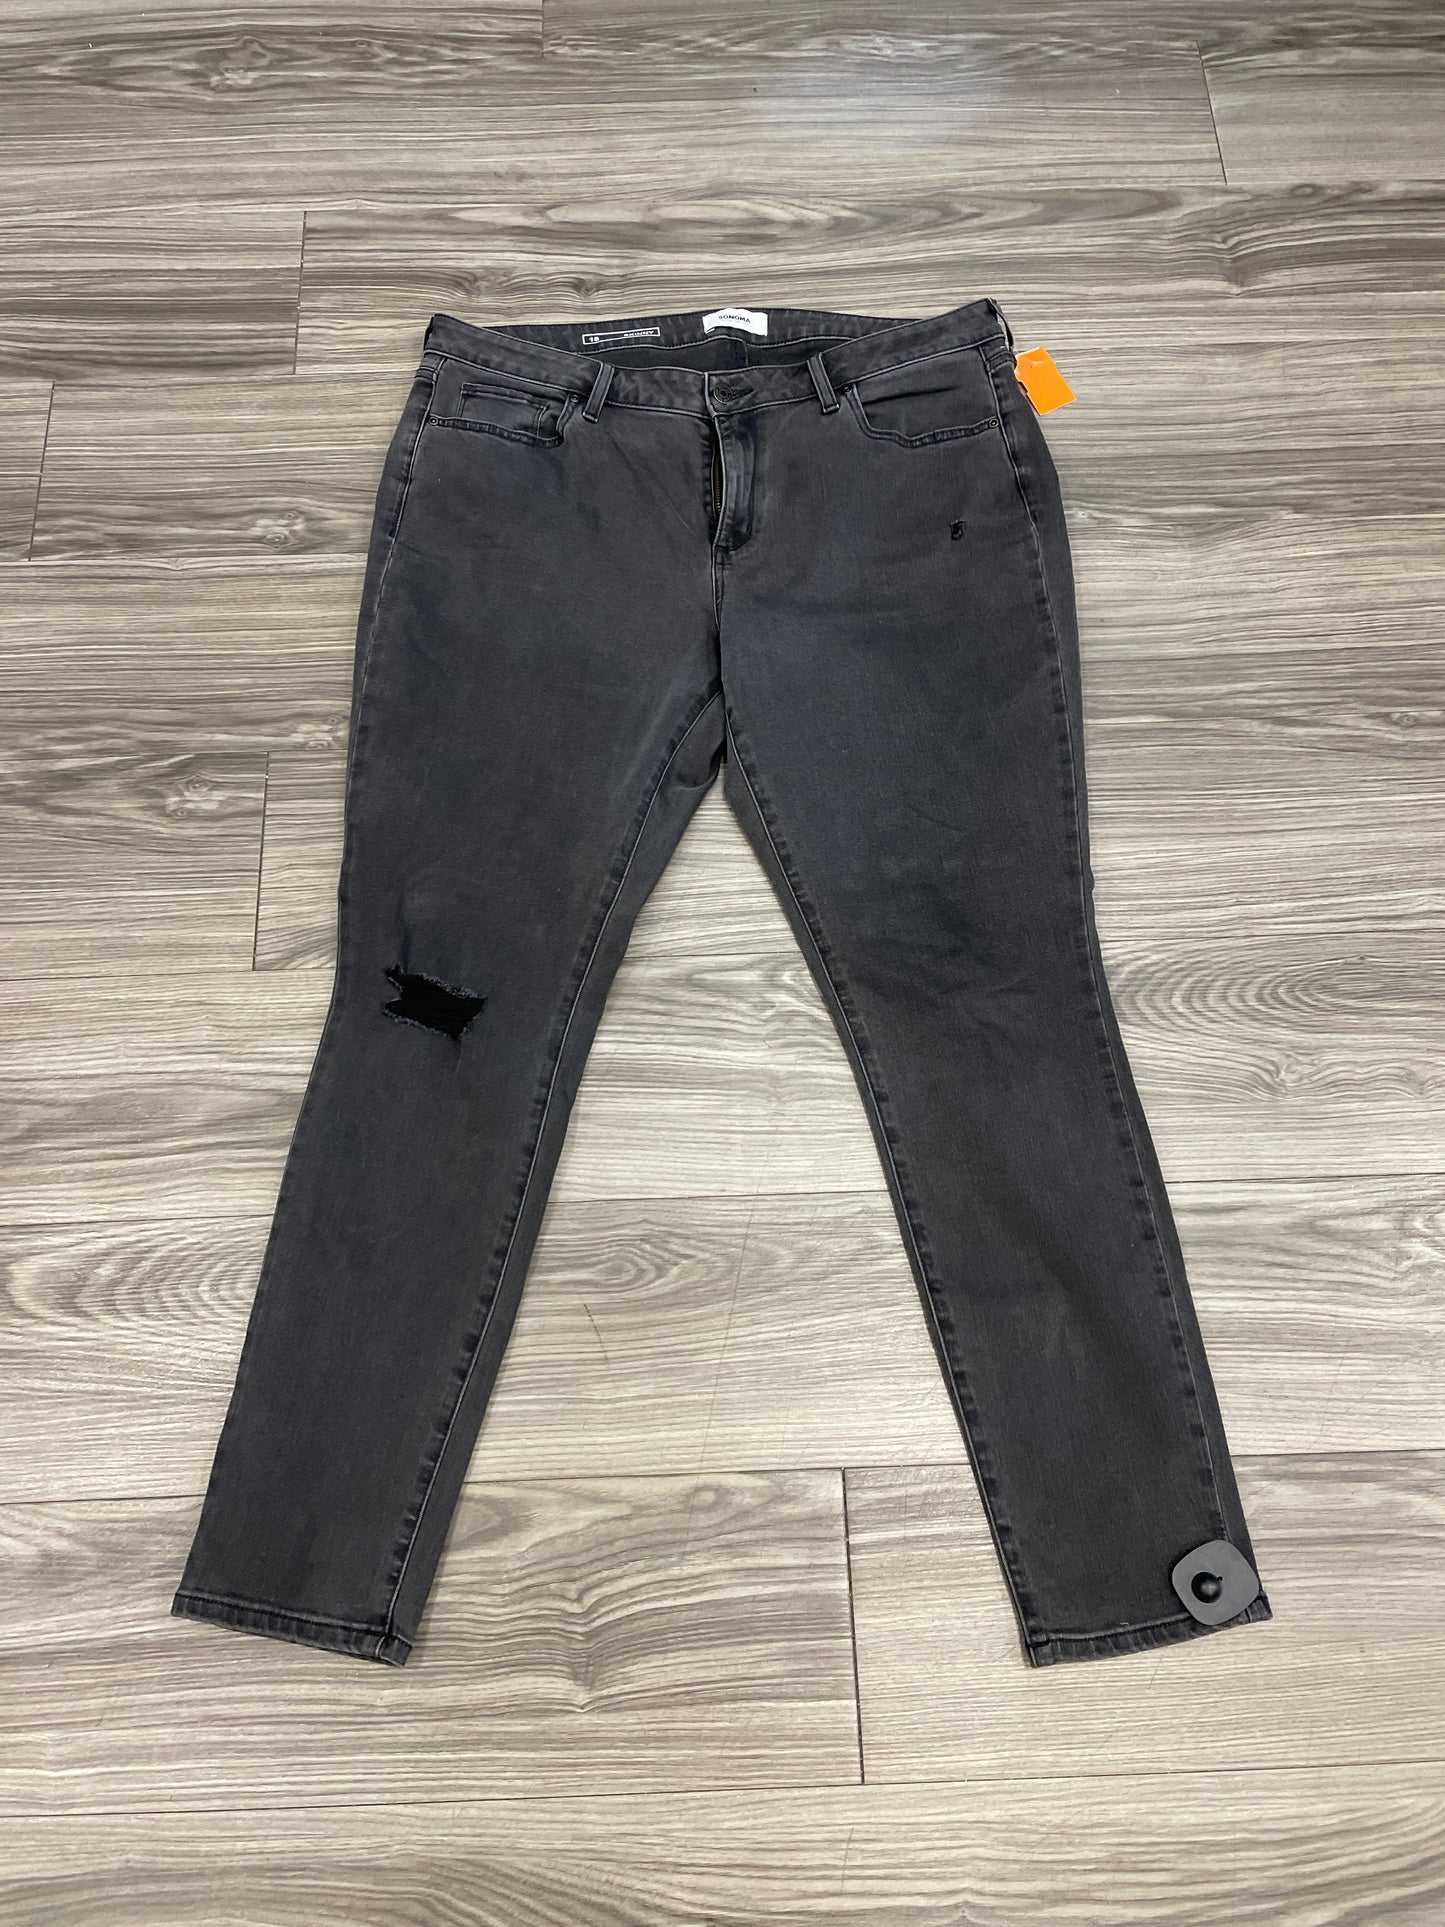 Jeans Skinny By Sonoma  Size: 18